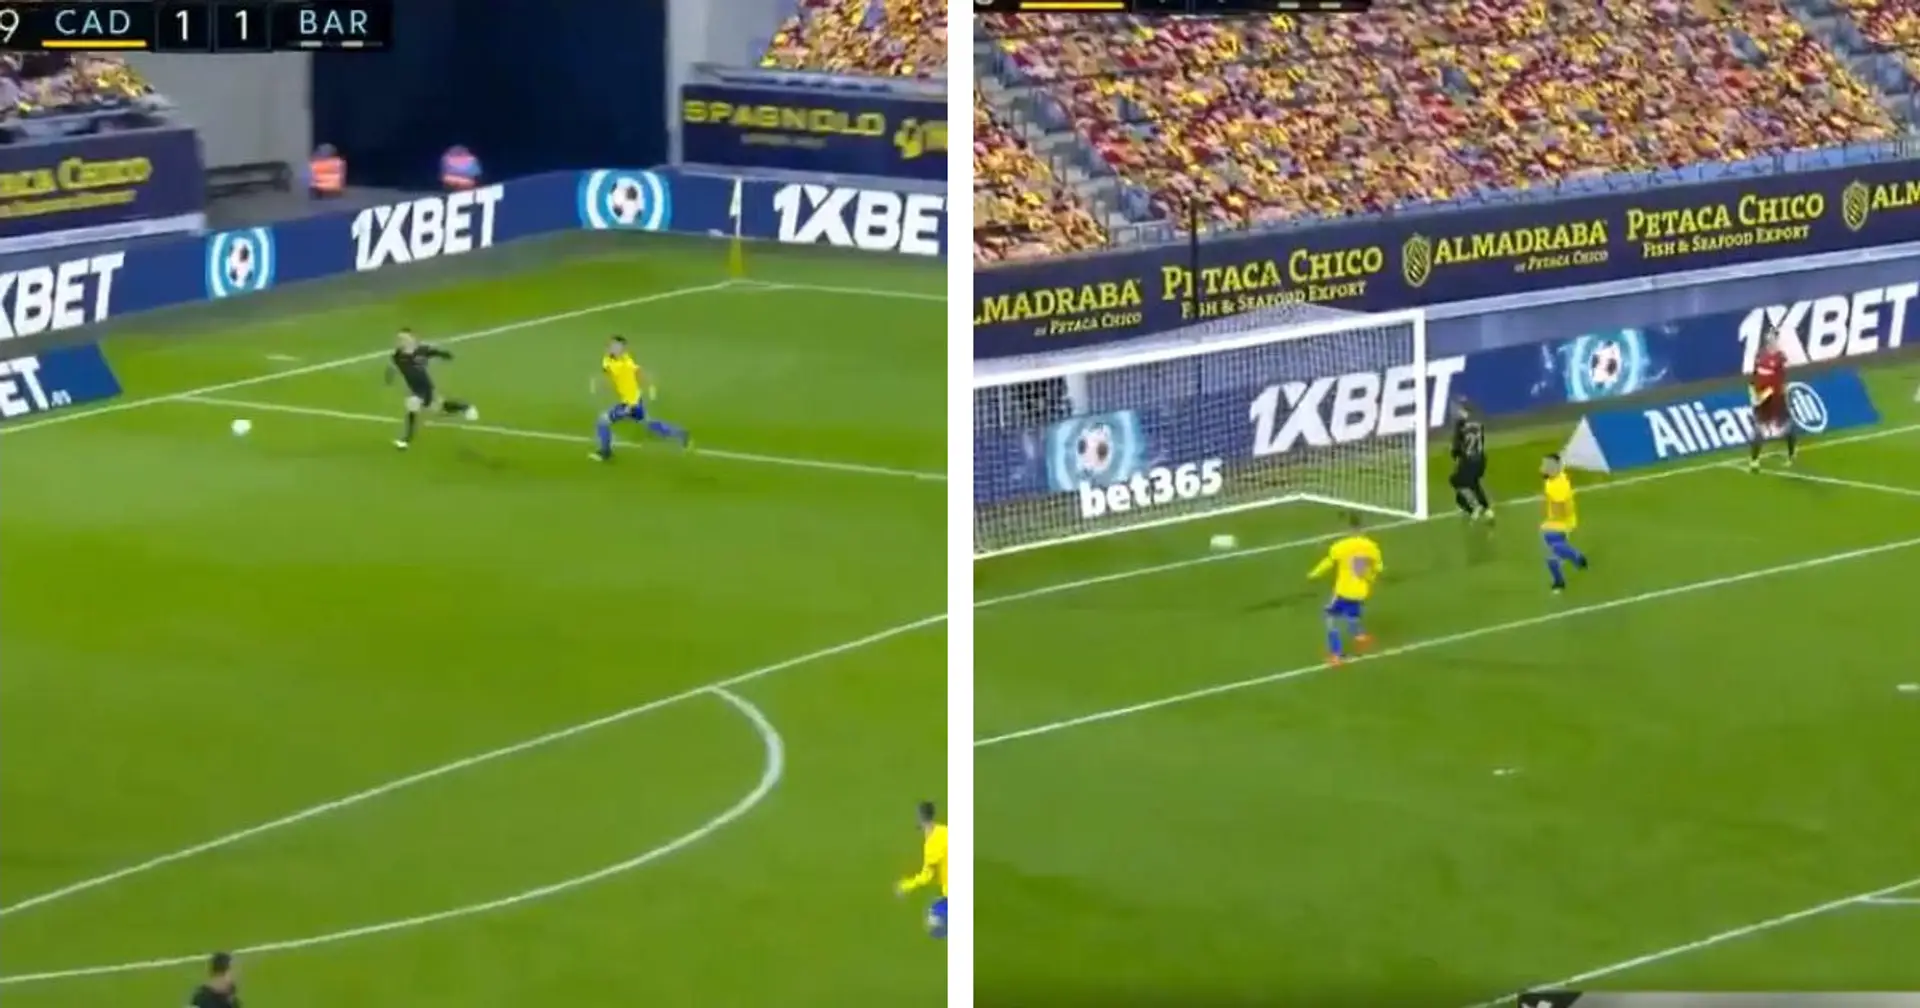 Another defensive mistake, another goal: this time Lenglet and Ter Stegen at fault